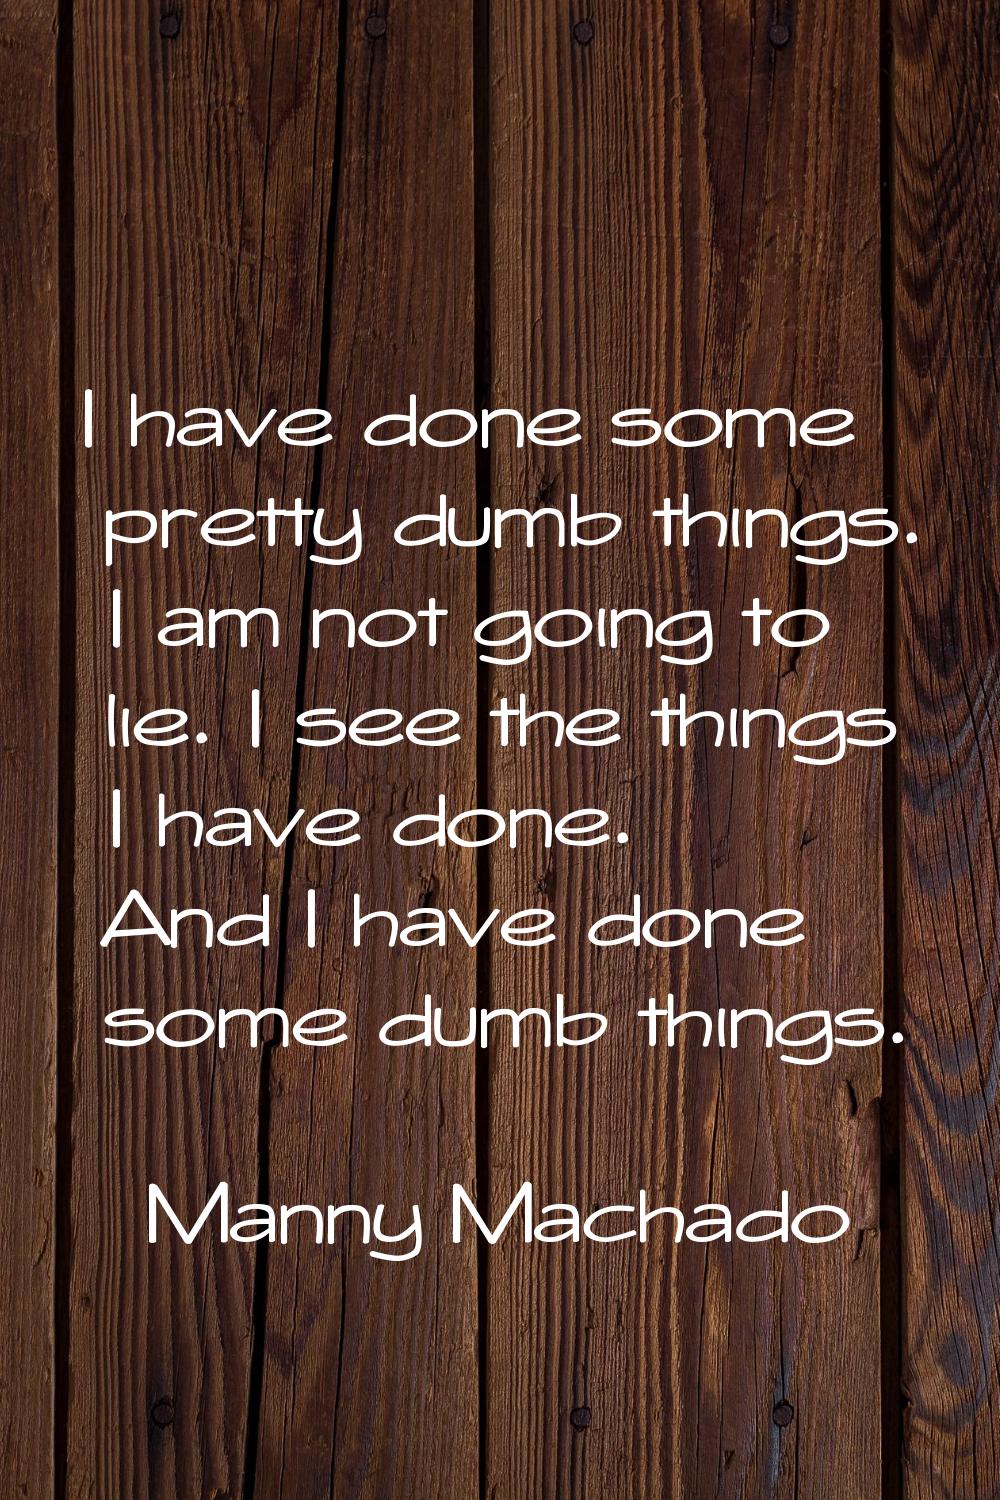 I have done some pretty dumb things. I am not going to lie. I see the things I have done. And I hav